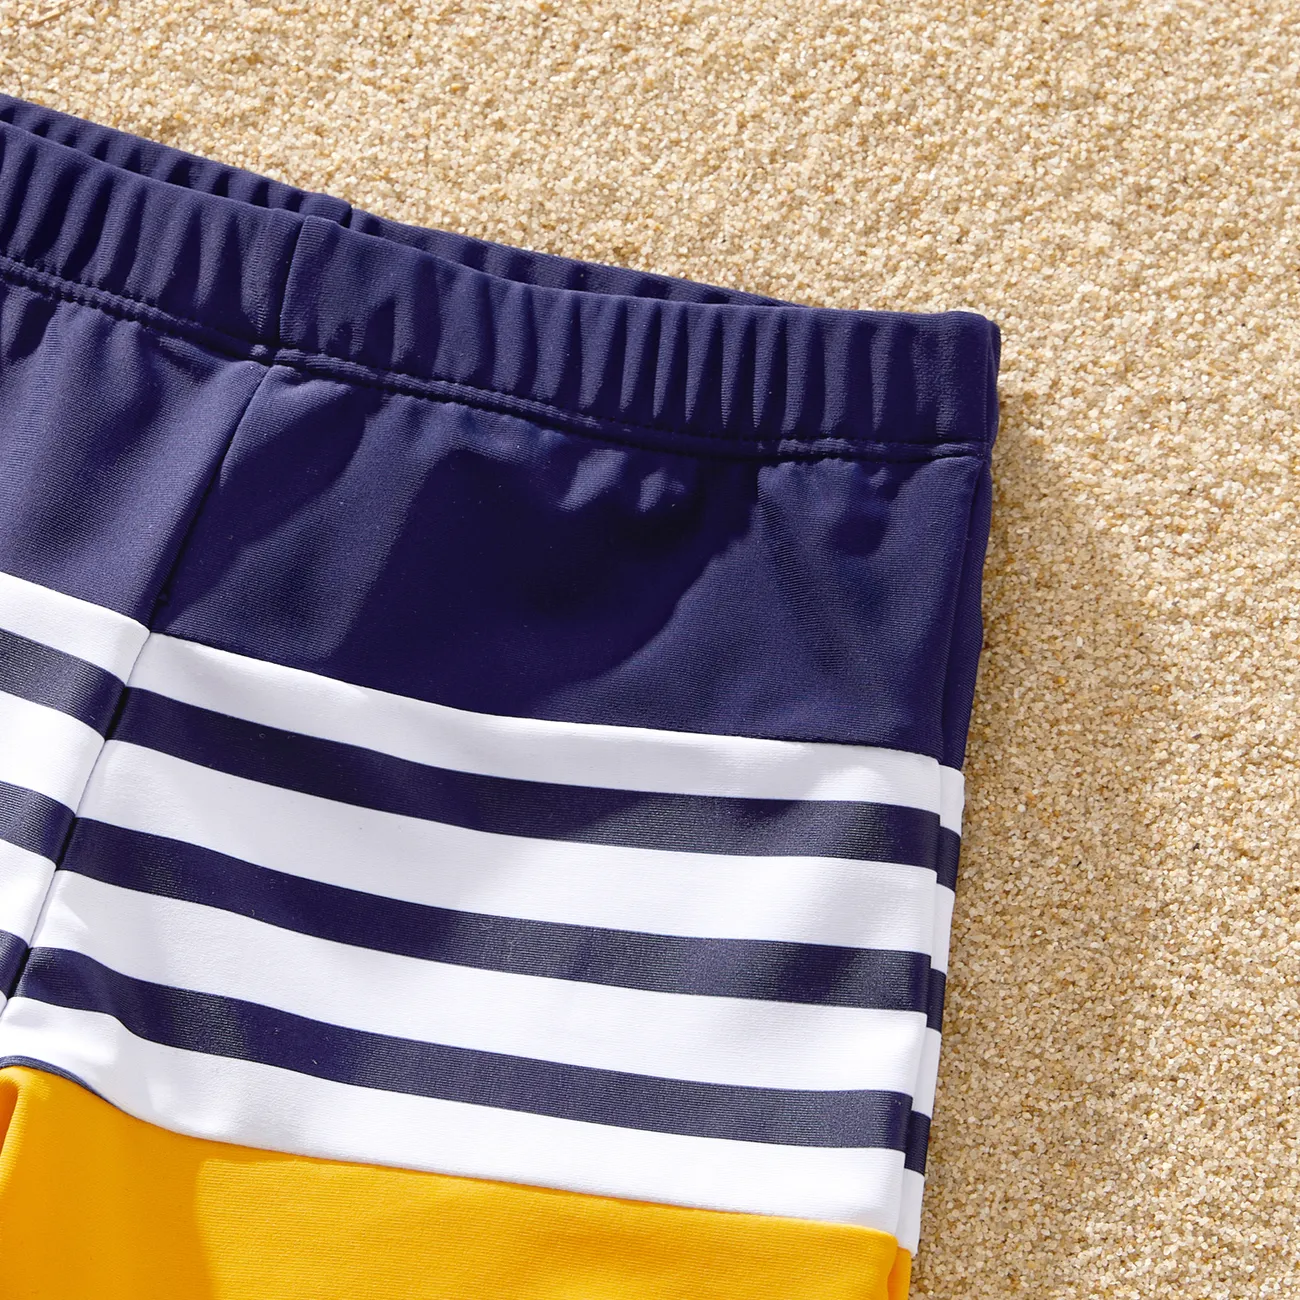 Family Matching Stripe & Colorblock Spliced One Piece Swimsuit or Swim Trunks Shorts ColorBlock big image 1